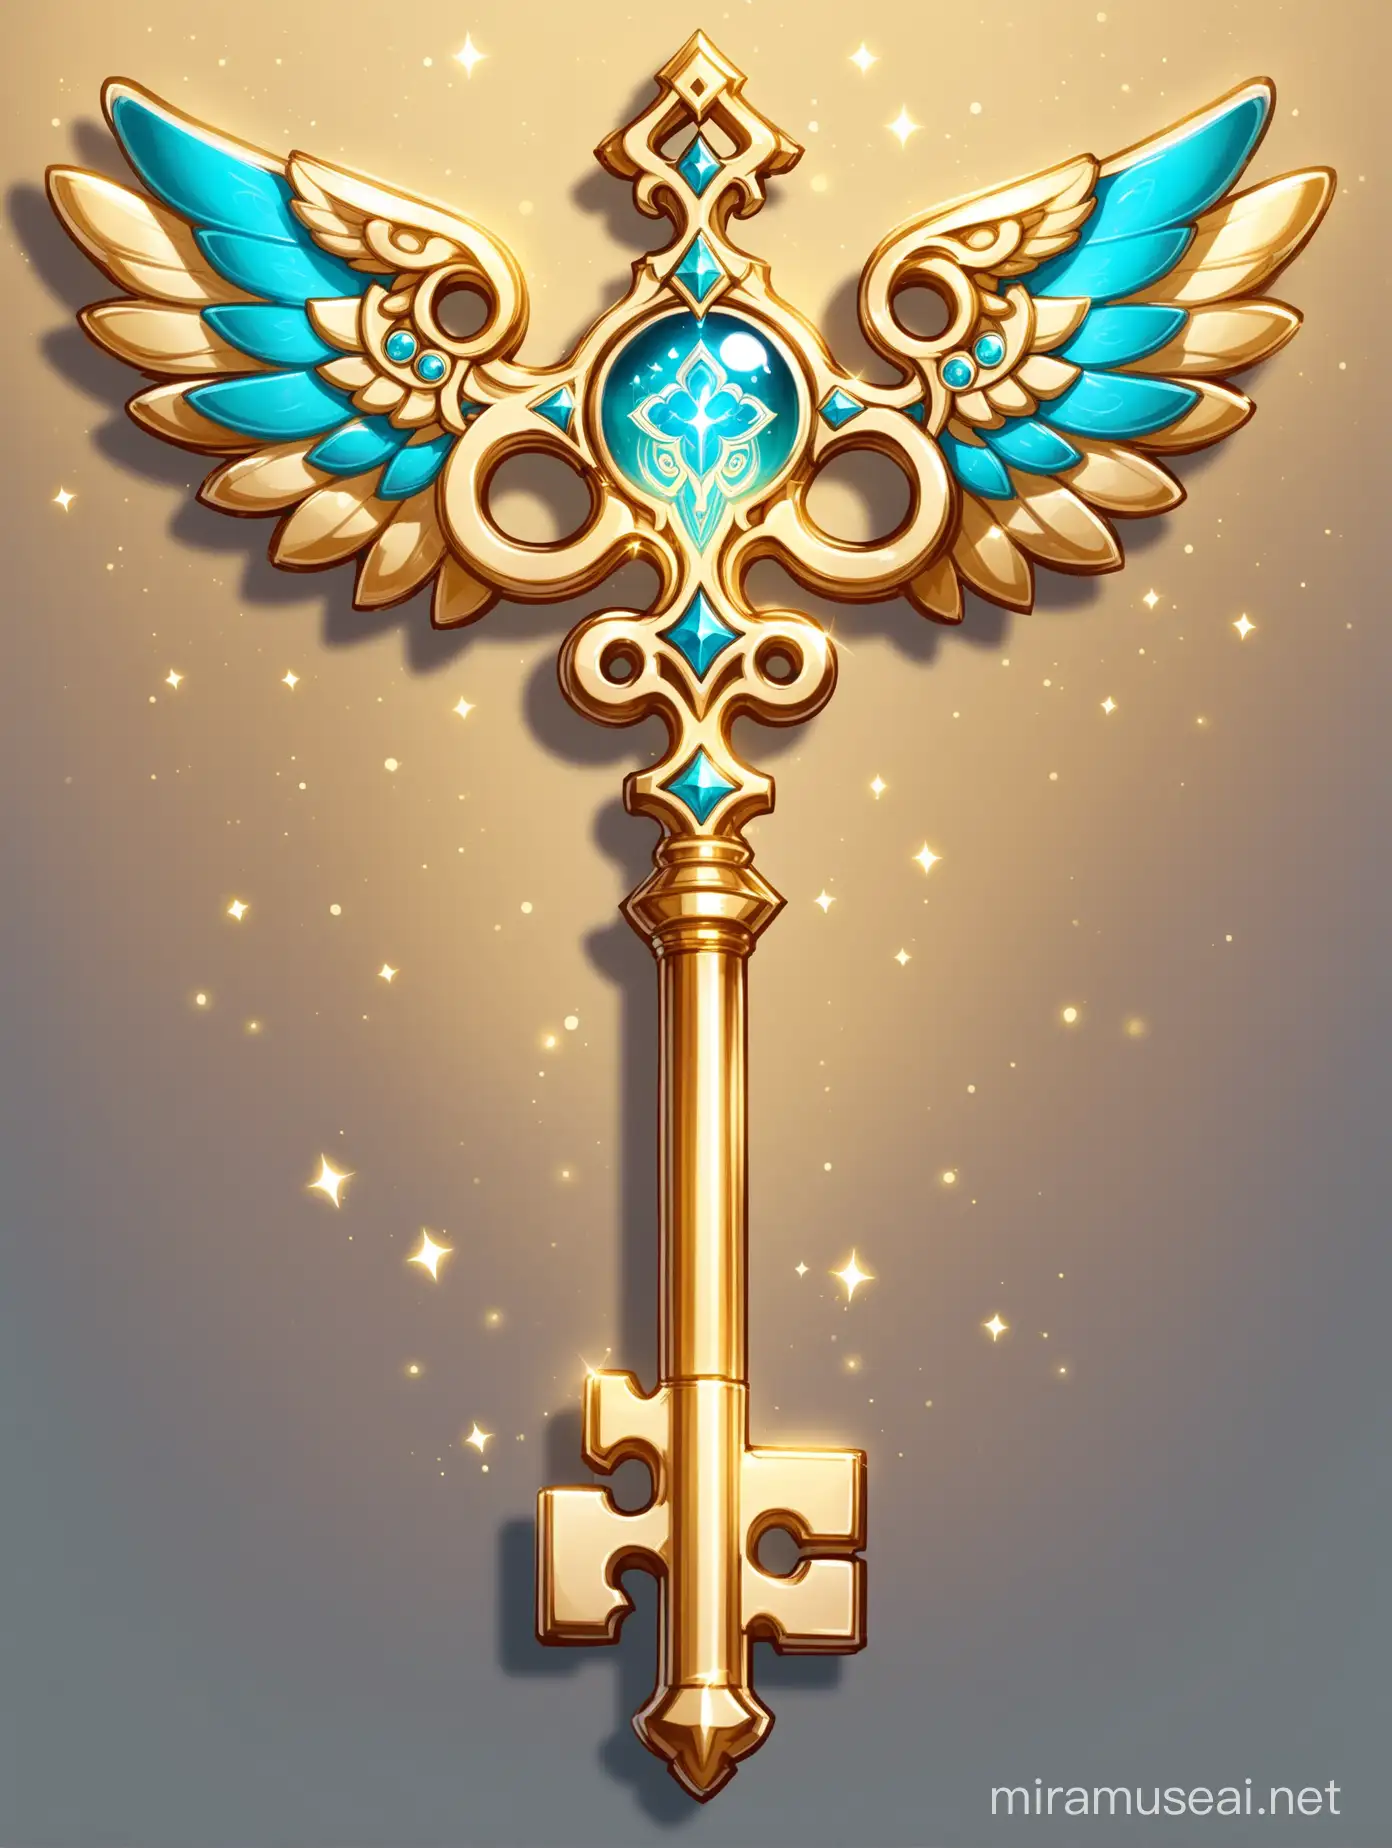 TurquoiseEmbedded Golden Key with Angel Wing Anemo Gnosis Inspired Art